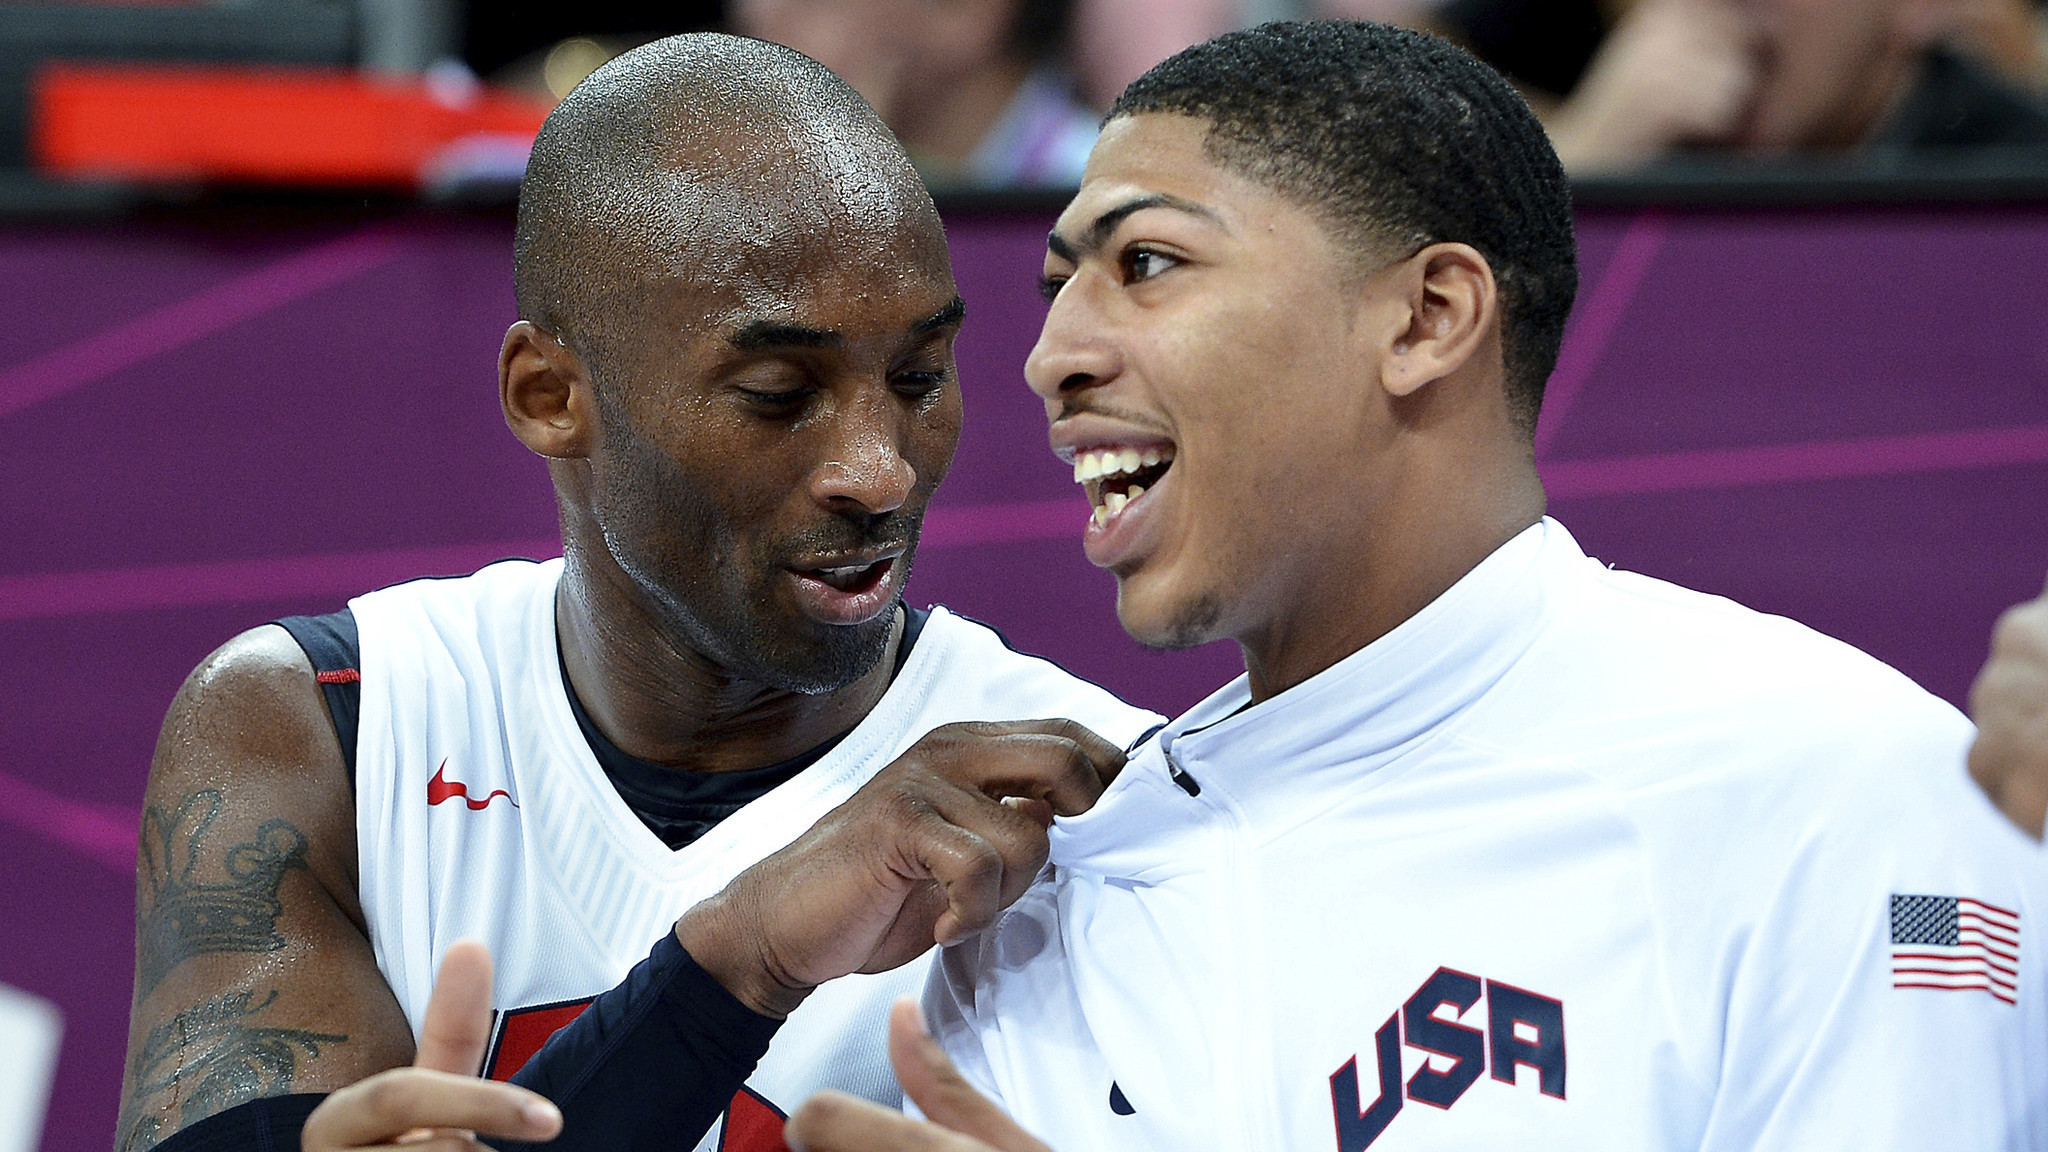 Anthony Davis says he loved working with Kobe Bryant on Olympic team